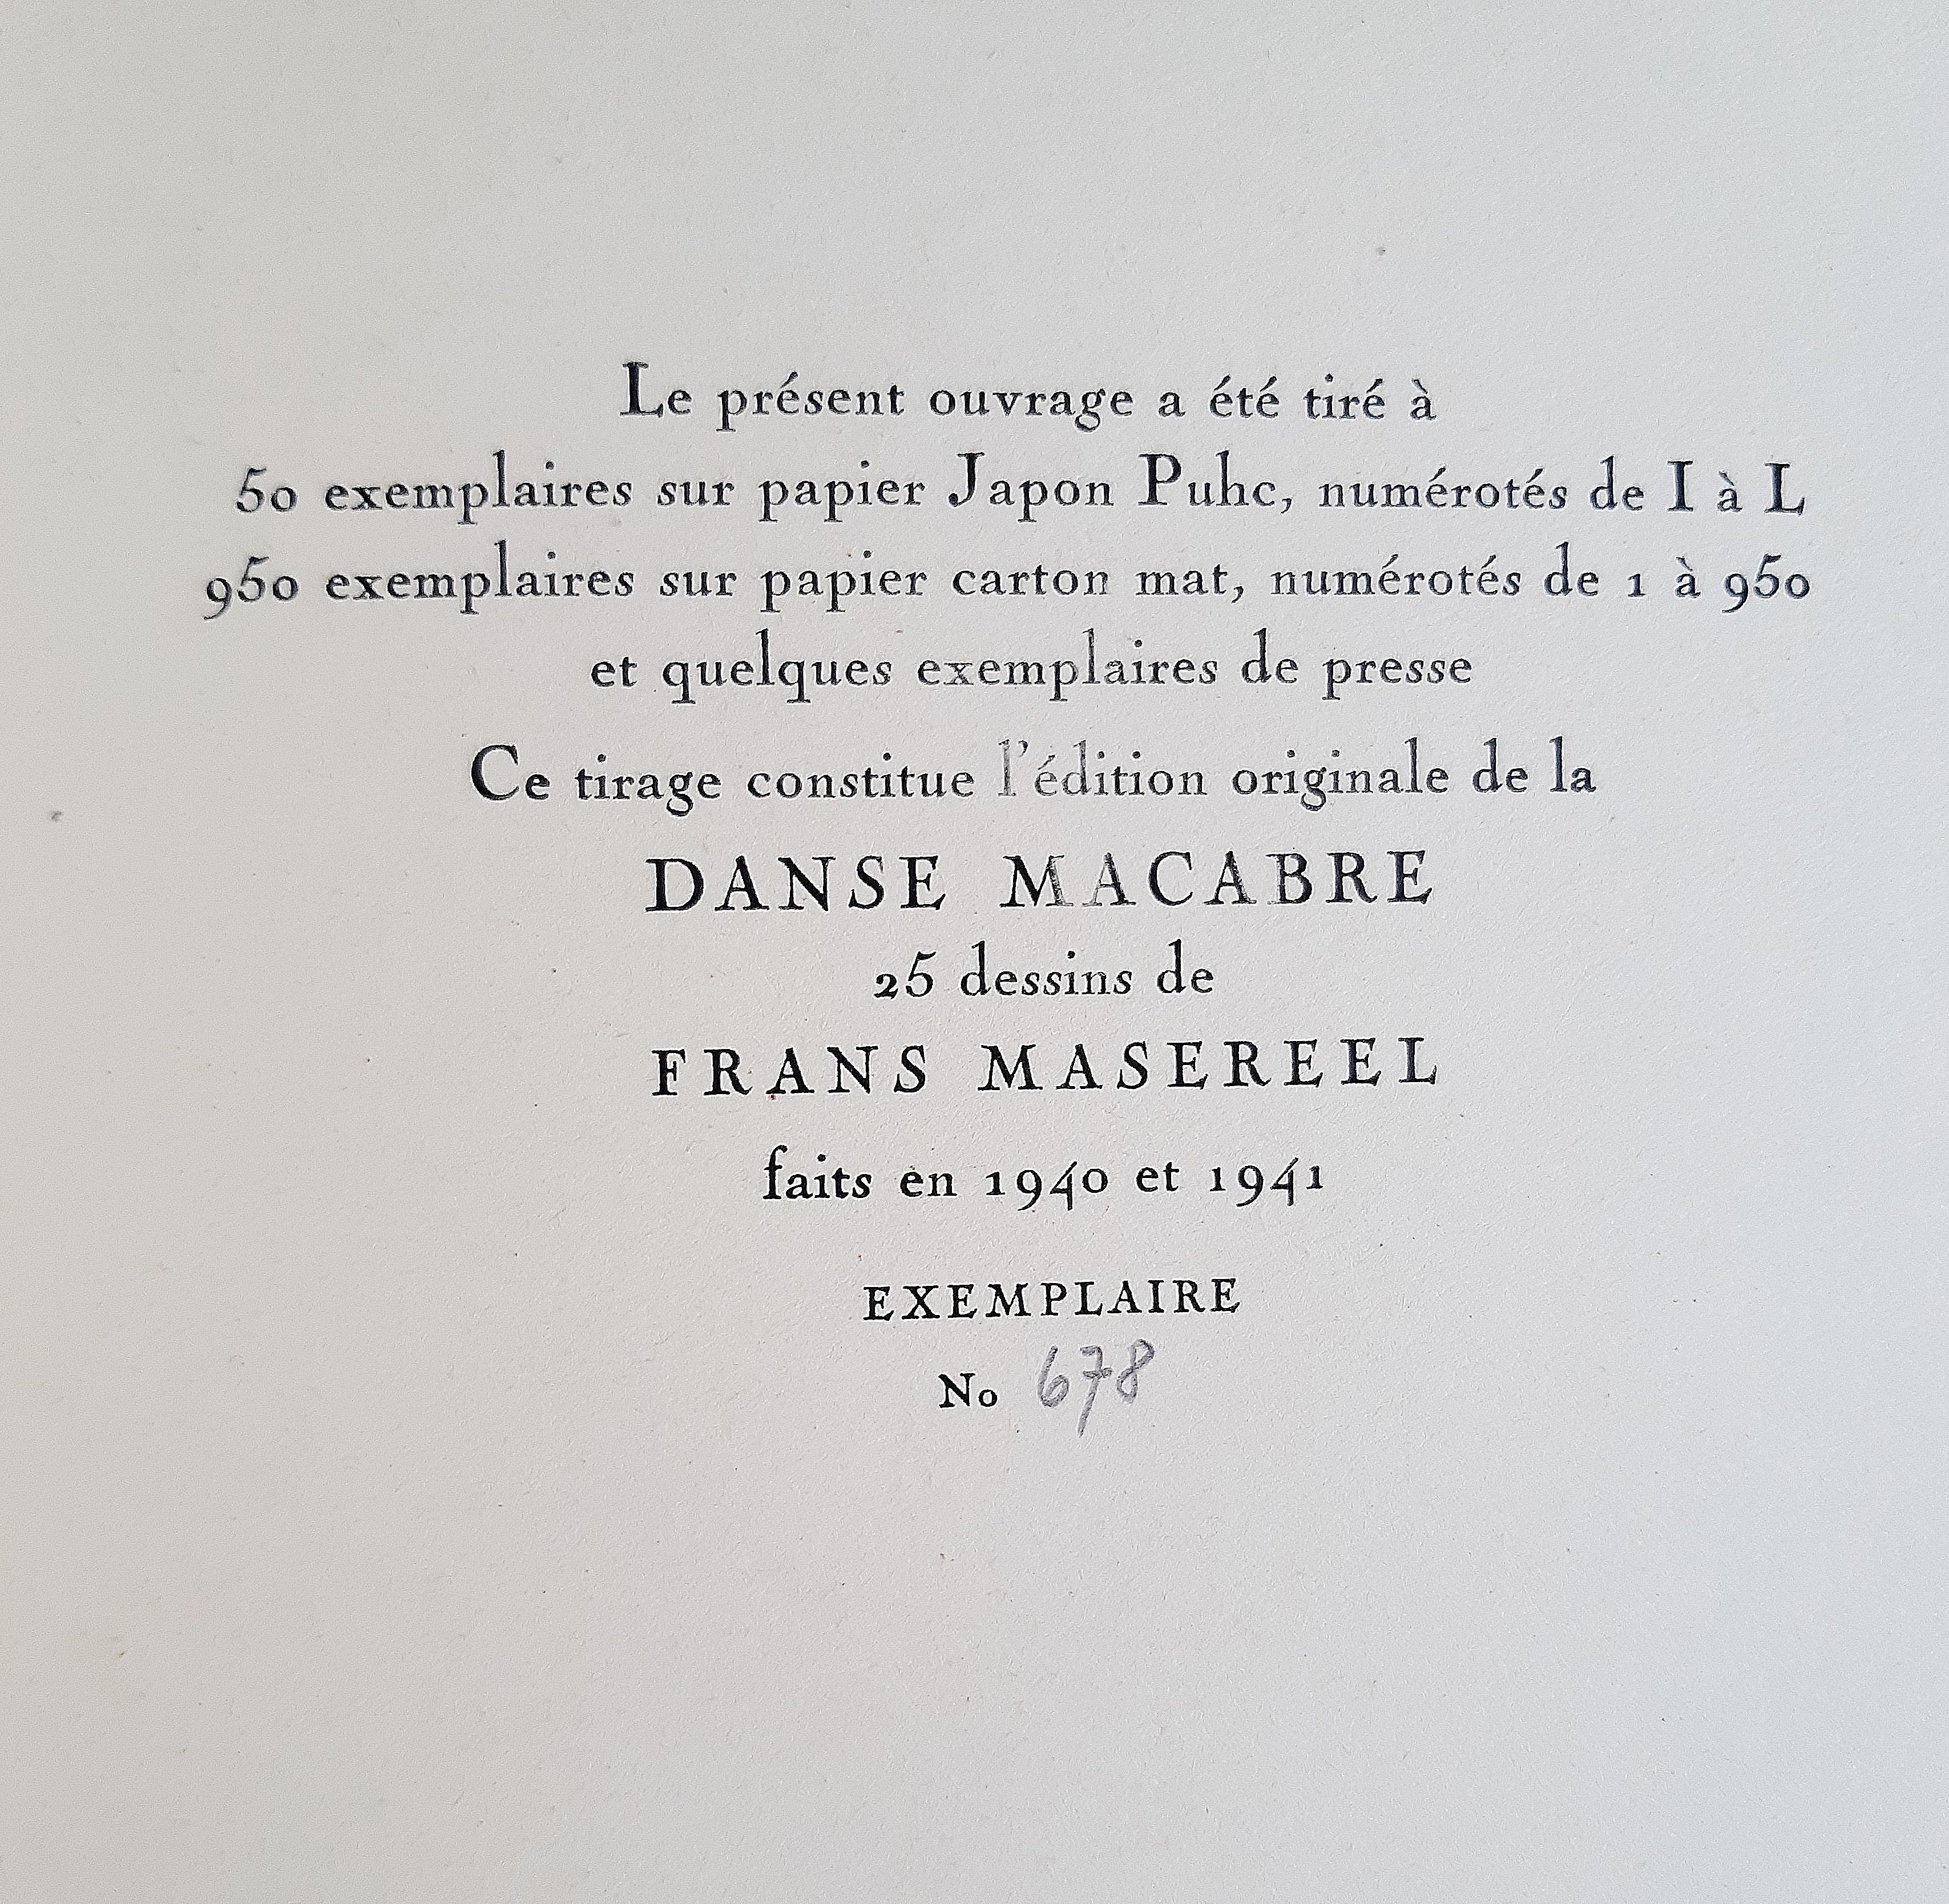 Danse Macabre is an original Rare Book illustrated by Frans Masereel (1889 – 1972) in 1941.

Original Edition.

950 numbered copies.

Published by Lang, Bern.

Format: Large 4°. The dimensions and the weight are indicative.

The book includes 25